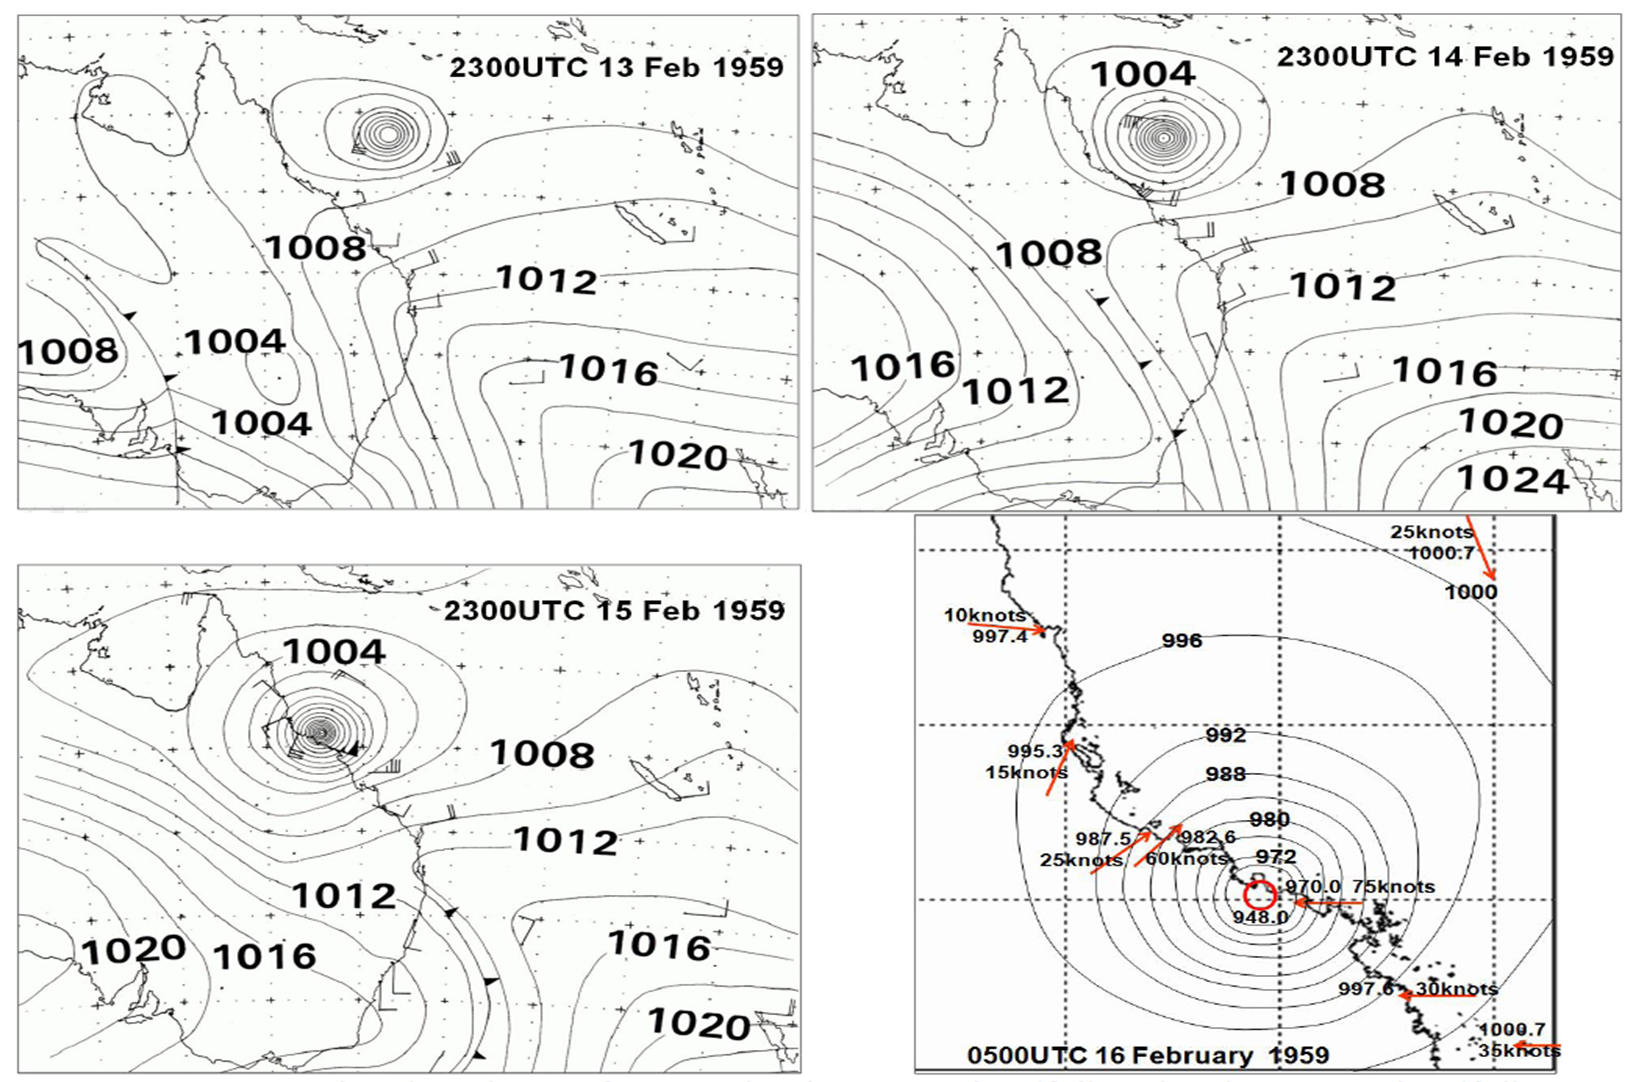 Mean sea level analyses of 1959 Cyclone Connie leading up to landfall and a close up at landfall